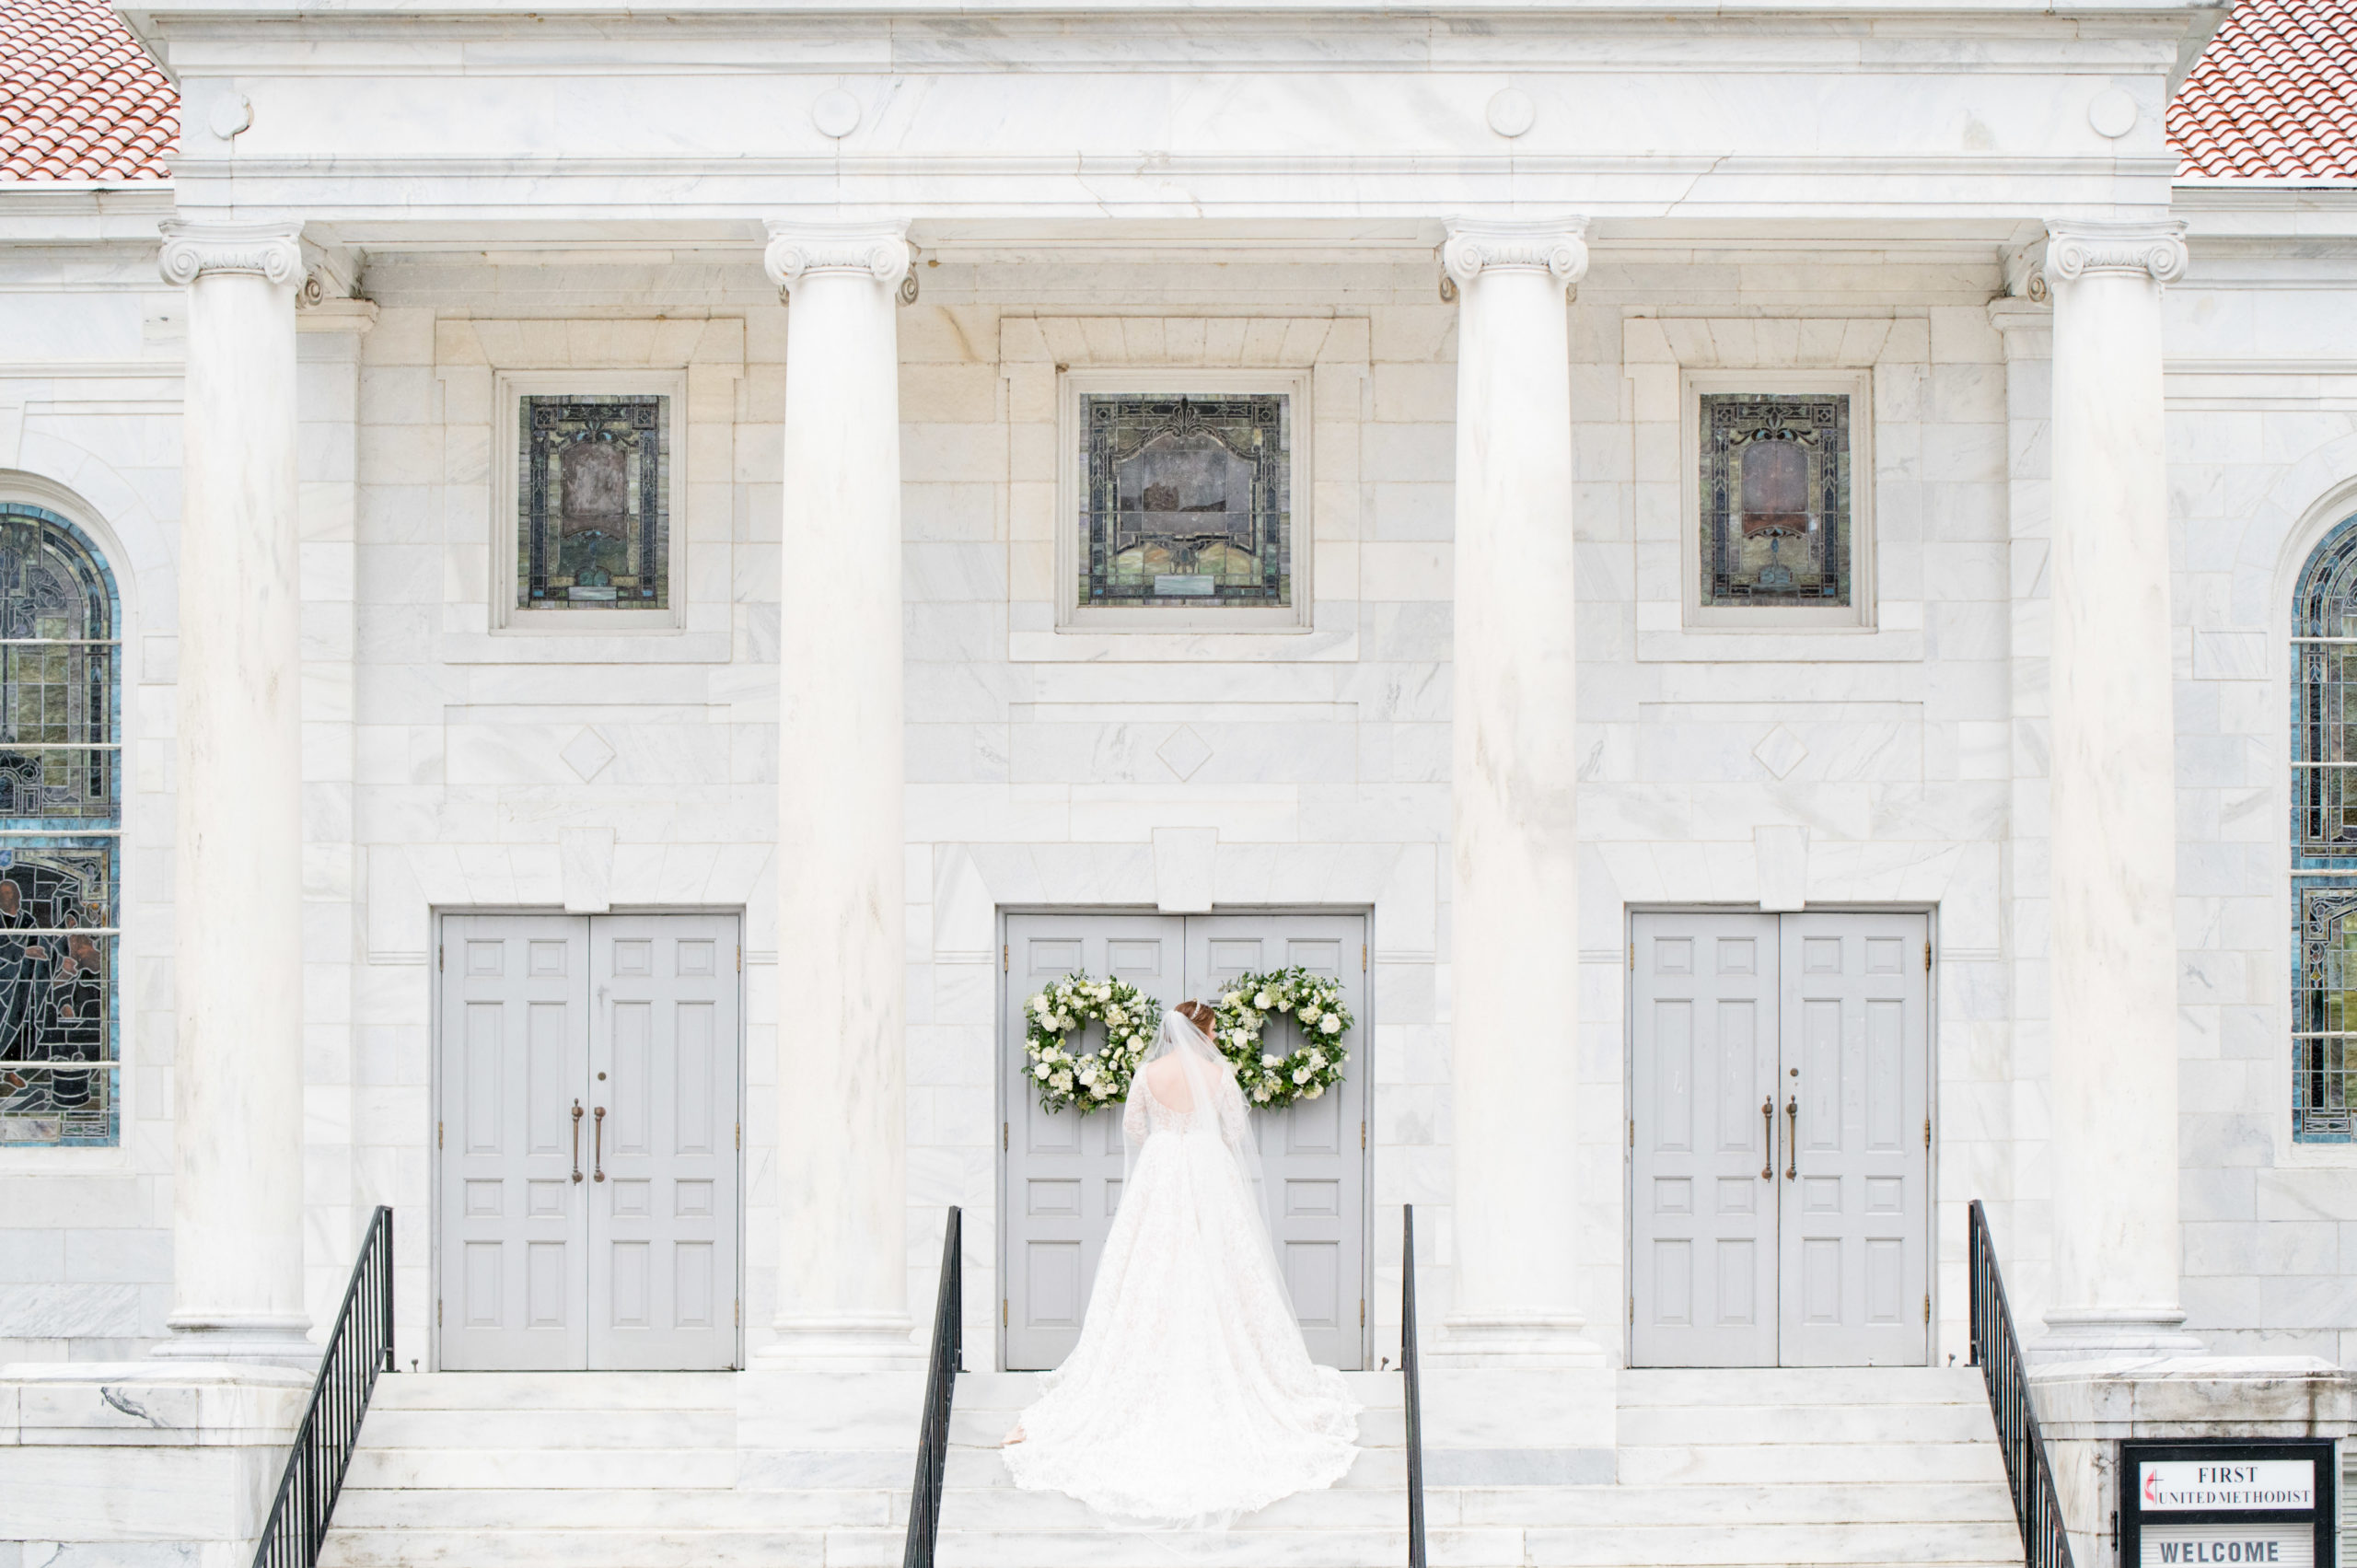 Bride shows off back of dress on marble staircase.